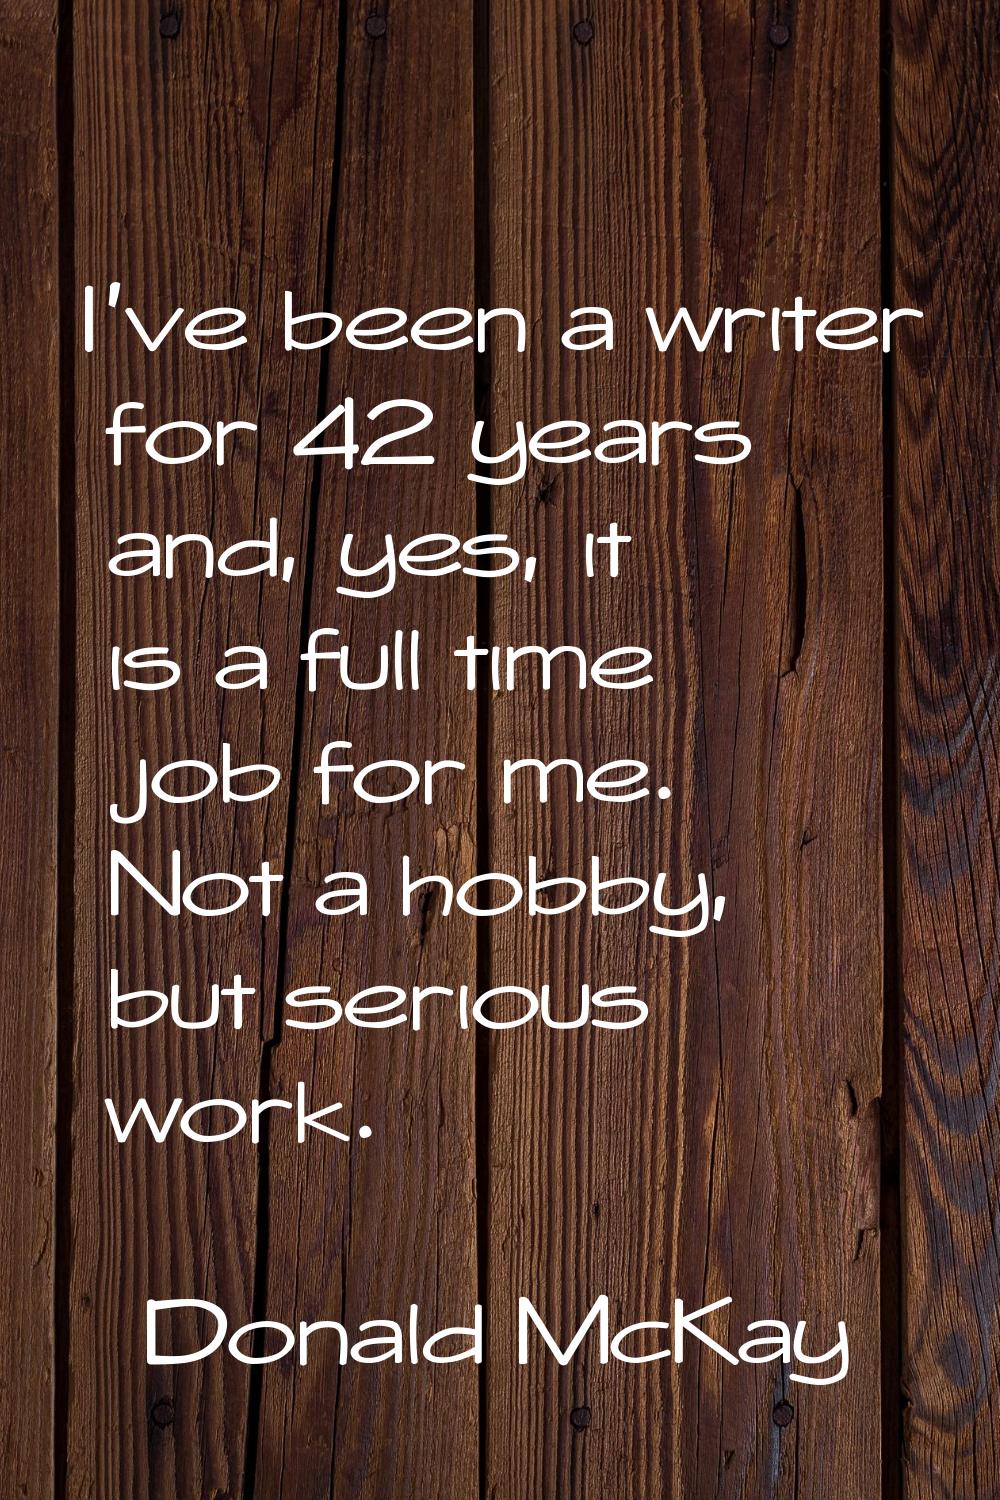 I've been a writer for 42 years and, yes, it is a full time job for me. Not a hobby, but serious wo